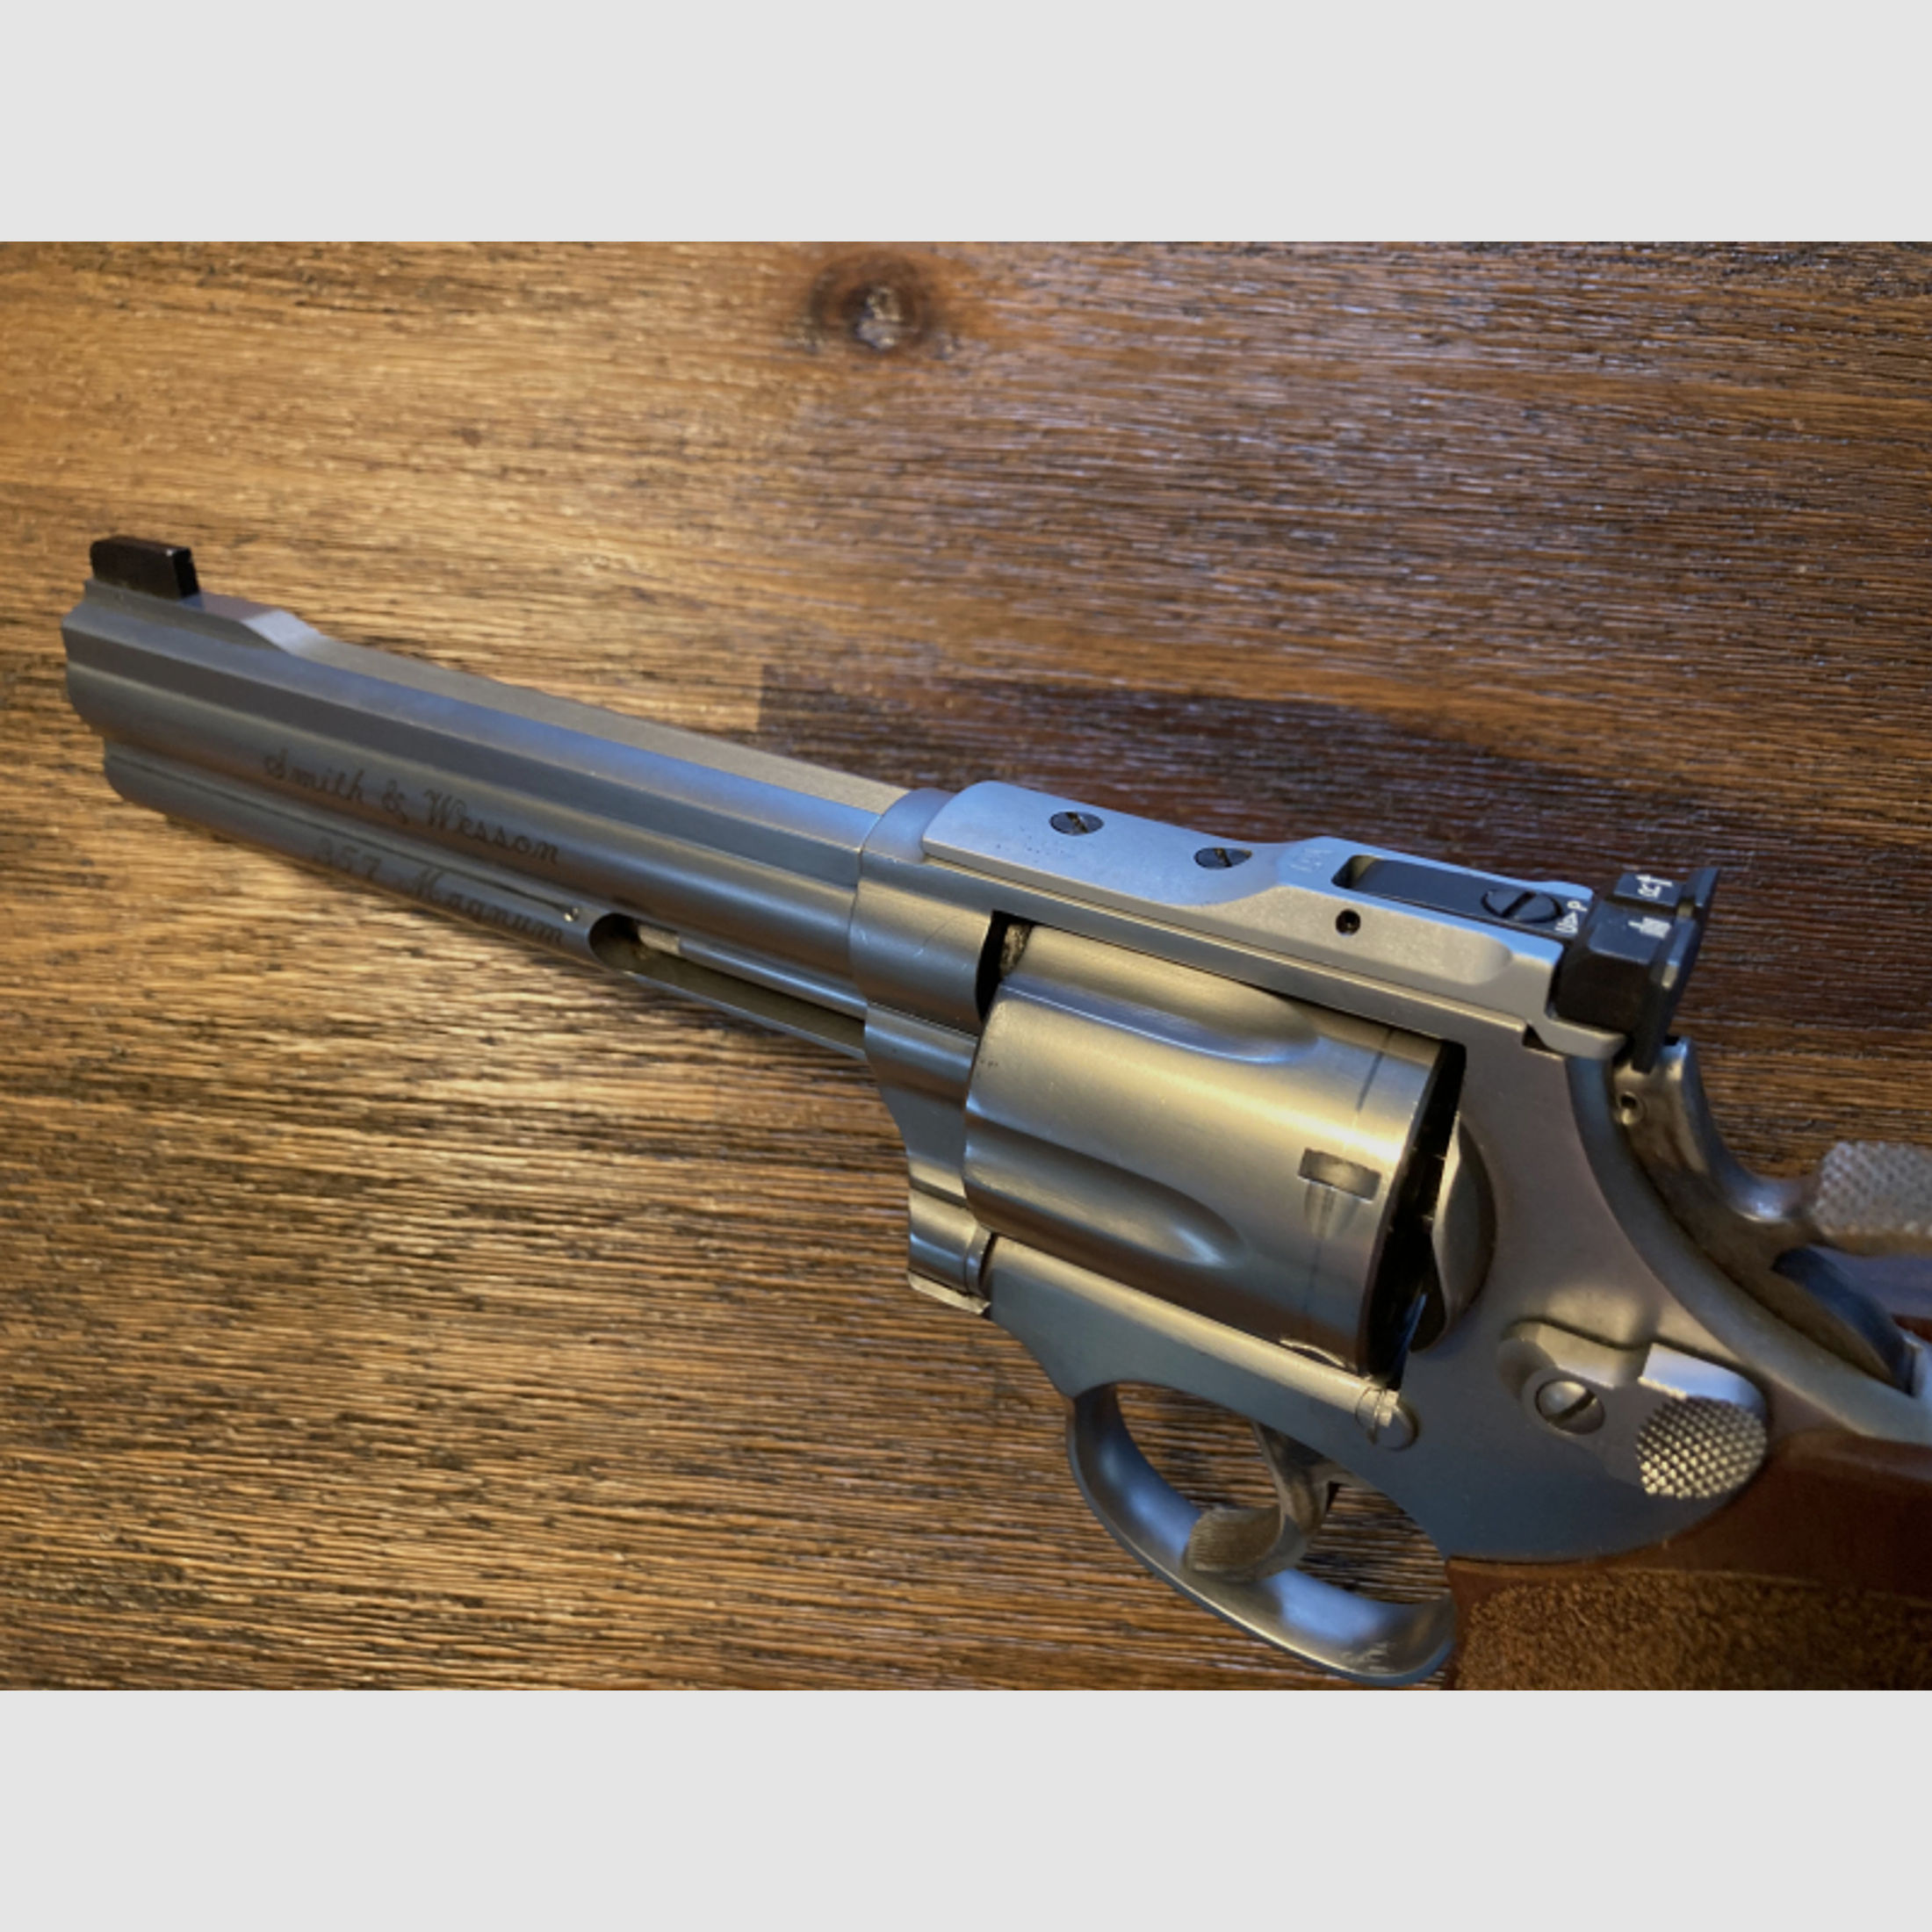 Smith&Wesson 686 Target Champion .357 Magnum